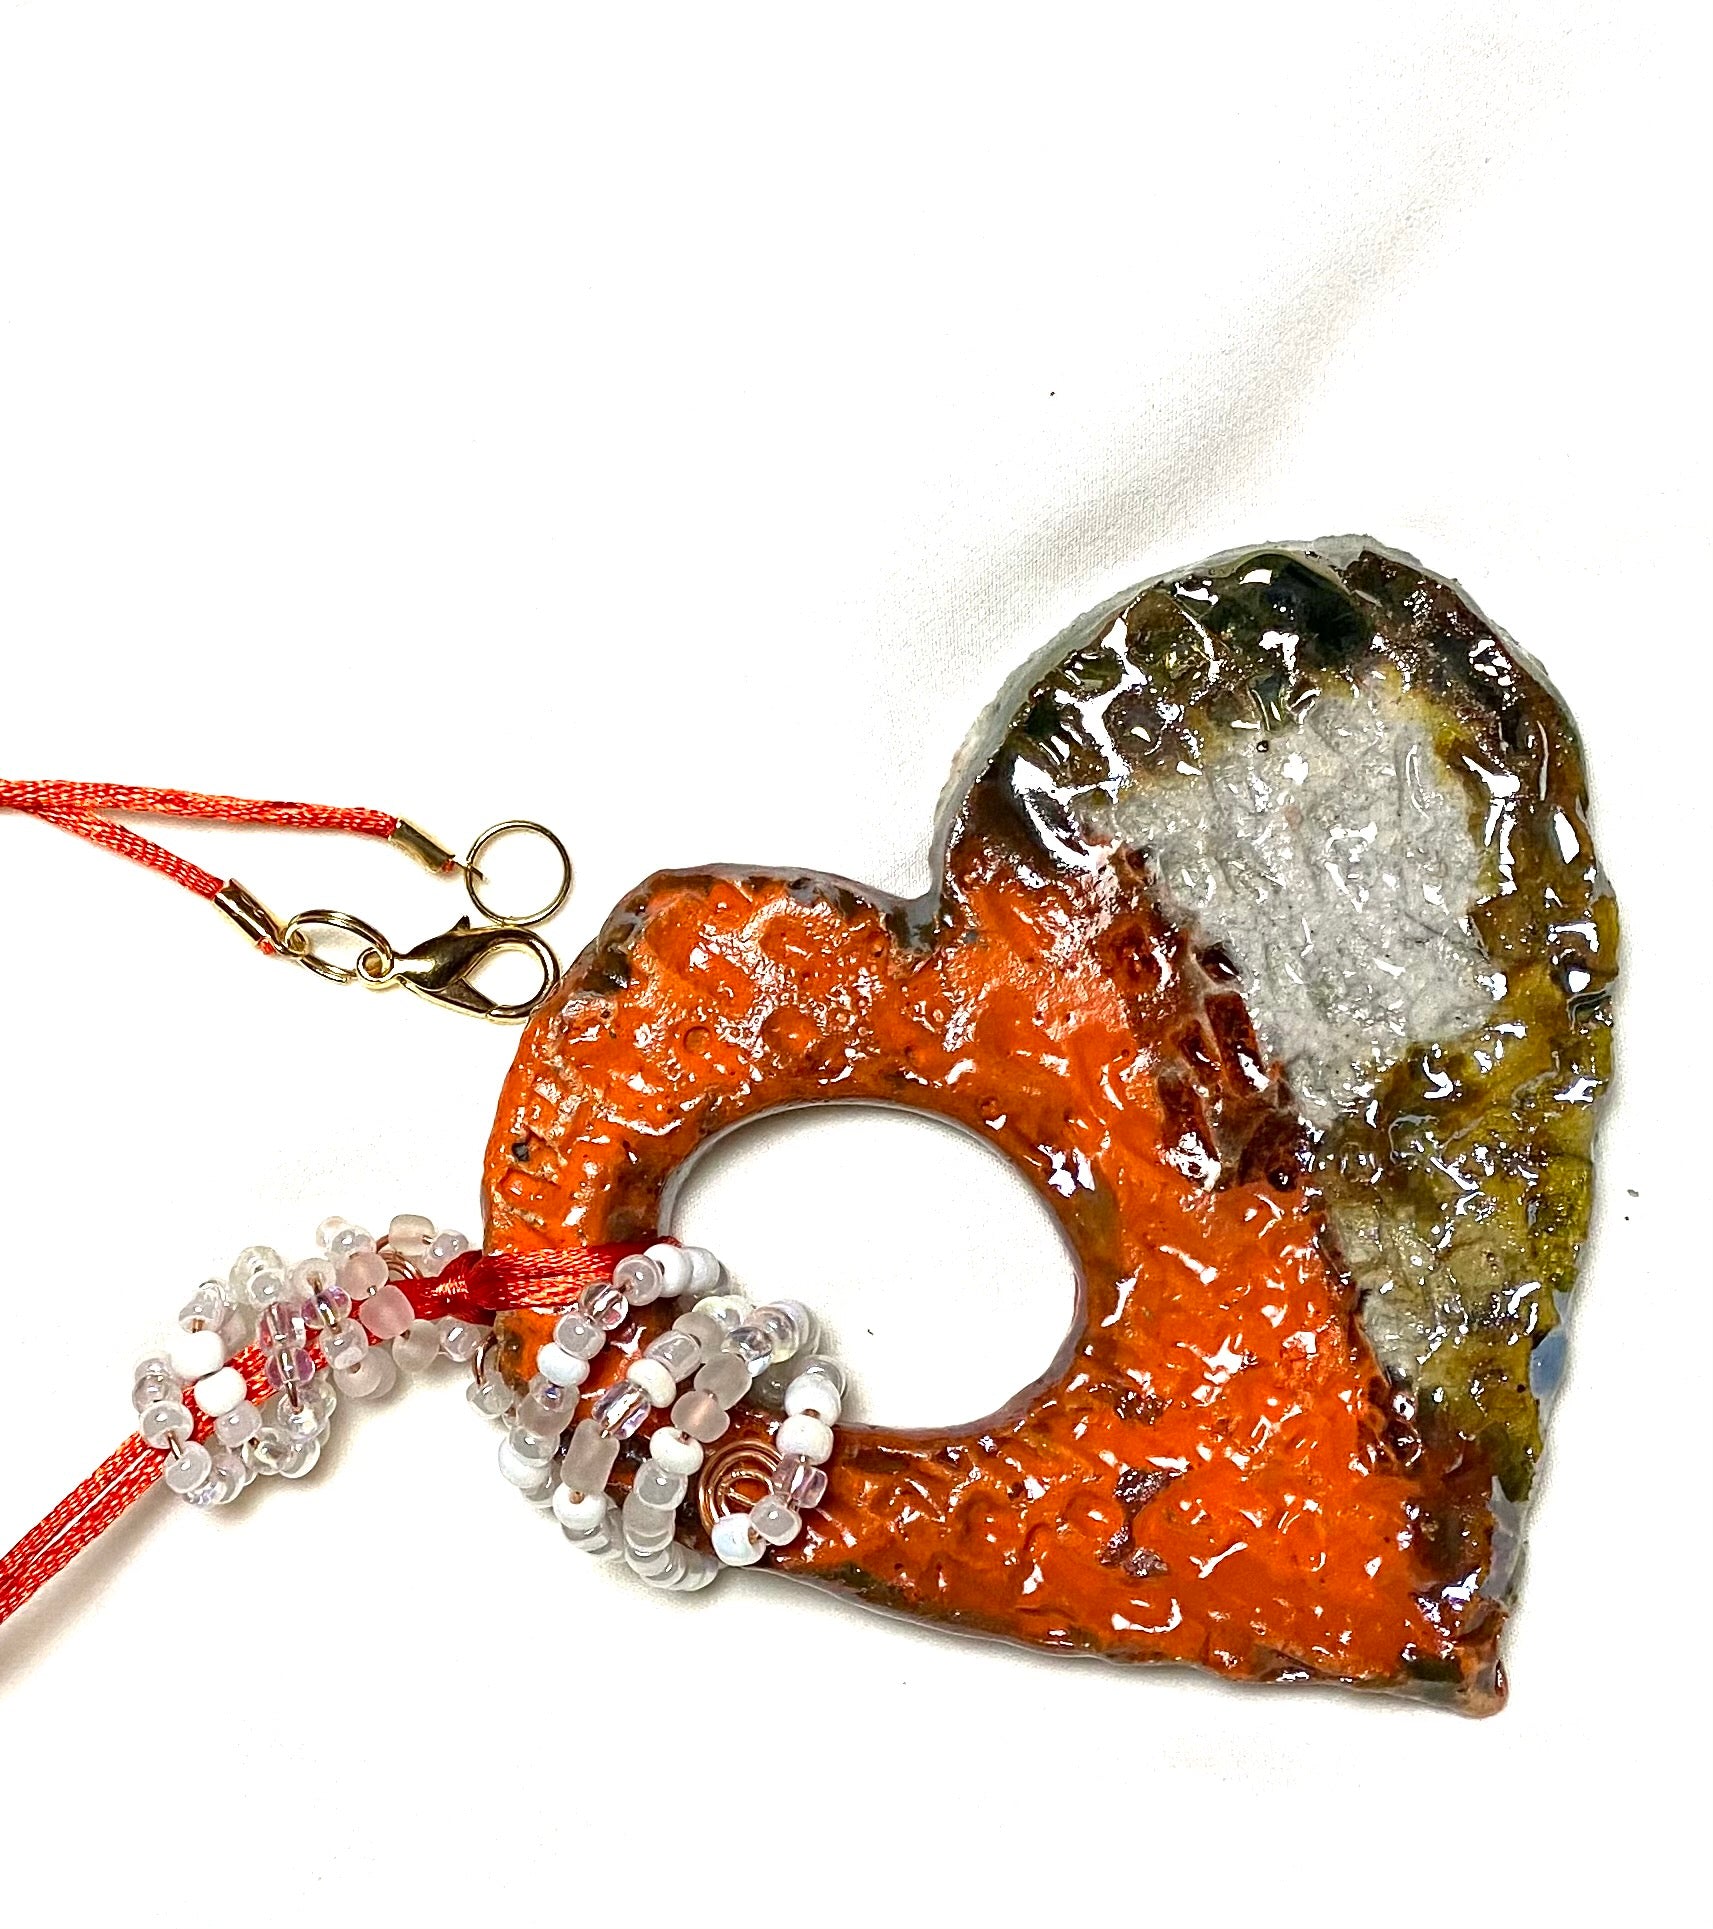 Have A Heart ! Each heart pendant is handmade with love! It is 3"x 3"and weighs approx. 3ozs. This pendant has a red violet and gold metallic raku glazes that renders a unique translucent  patina. The heart has a textured pattern . Both sides are  are different and equally beautiful! It holds a spiral of white and clear mini beads on a spiral copper wire. This pendant has a nice 12" red rattail cord!